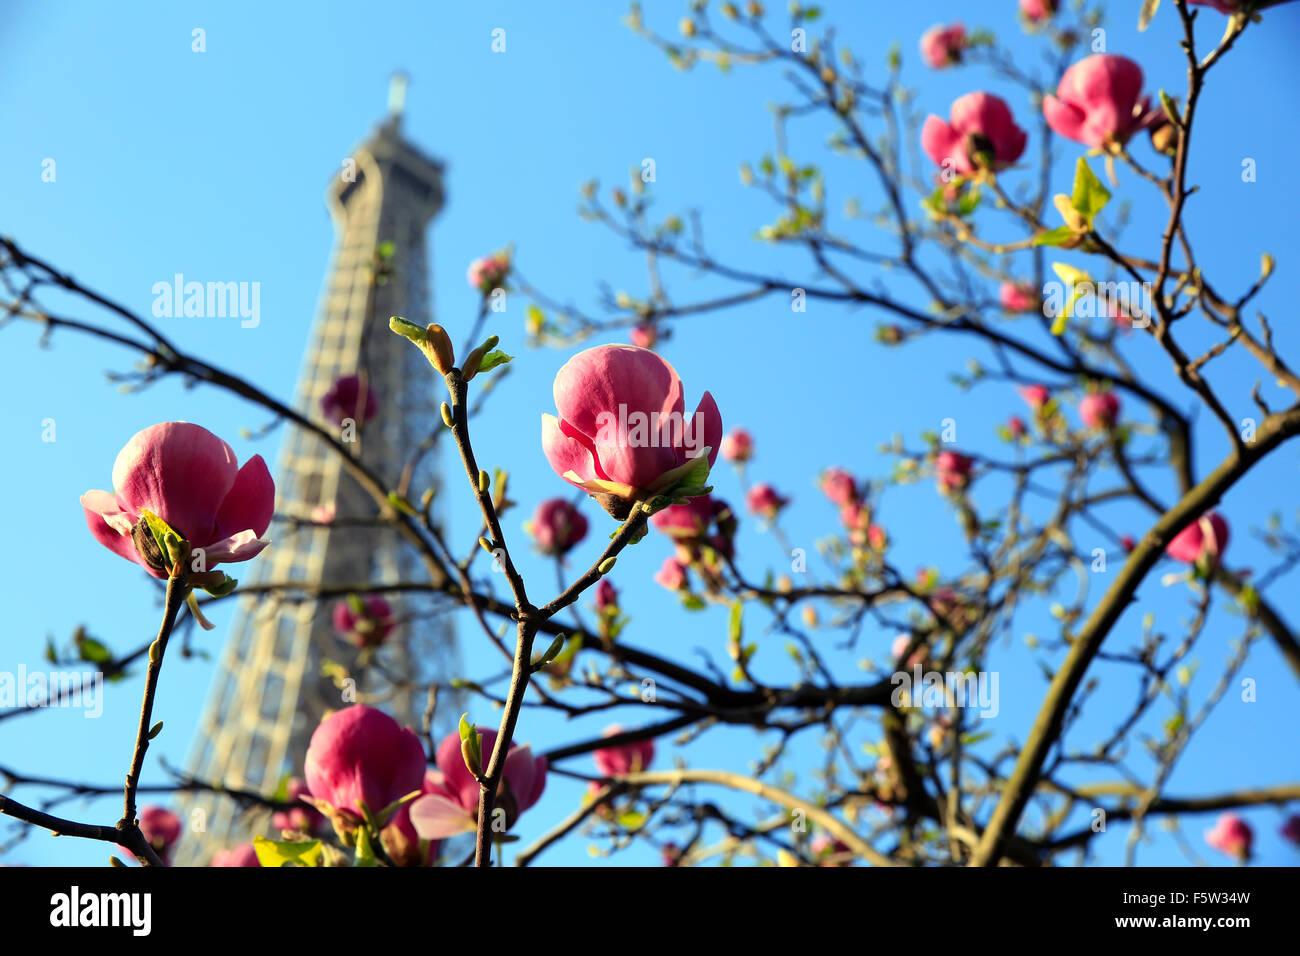 Eiffel Tower in spring time, Paris, France Stock Photo